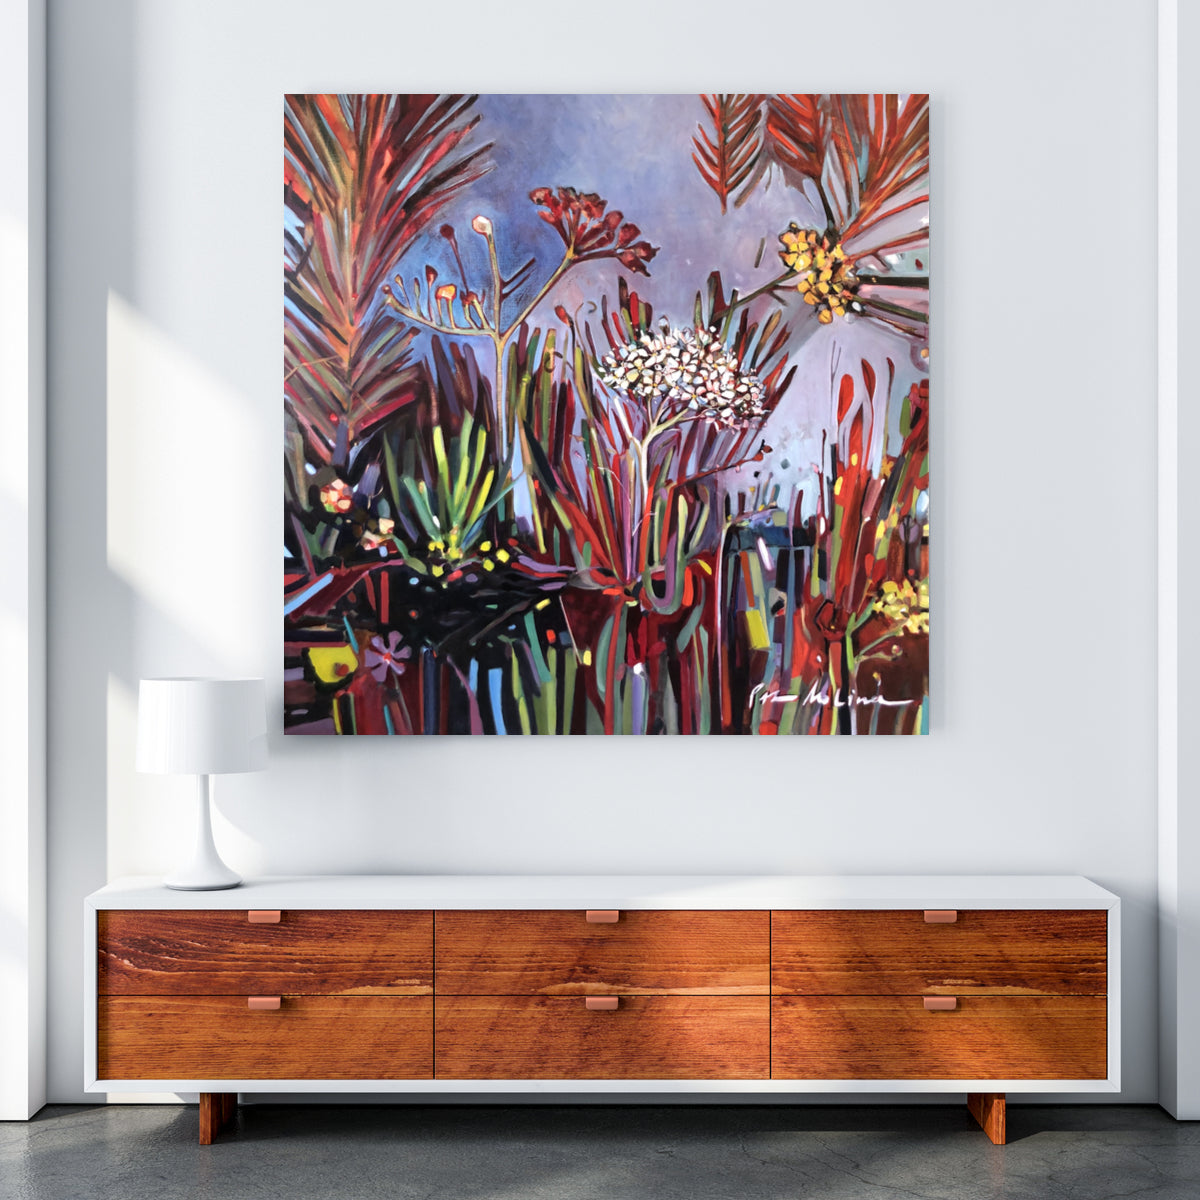 Grand Vibrant Floral Painting. Thick, Colorful Brushstrokes that burst open. Painting on a styled wall.